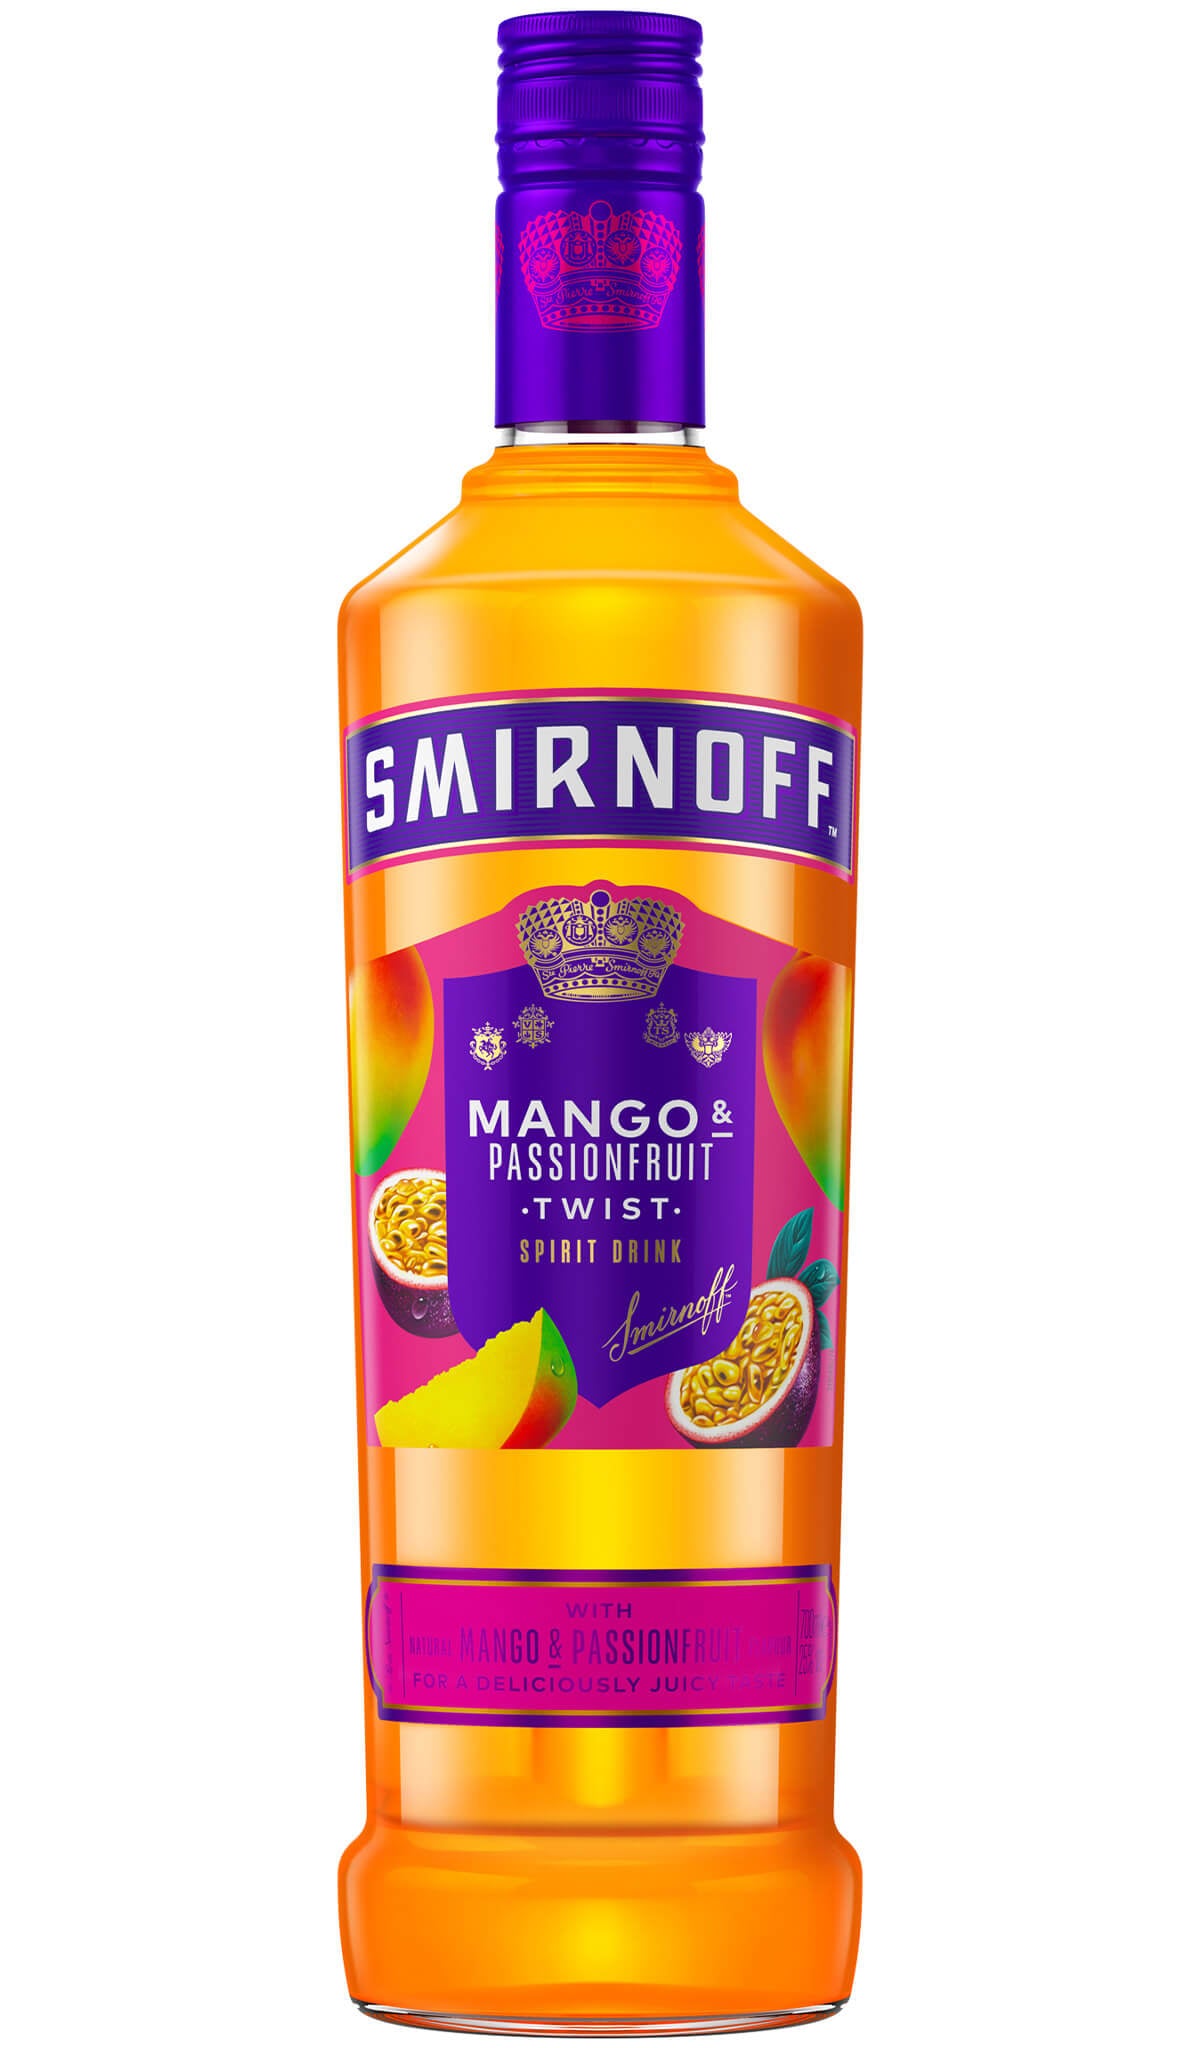 Find out more, explore the range and buy Smirnoff Mango Passionfruit Twist Vodka 700mL available online at Wine Sellers Direct - Australia's independent liquor specialists.